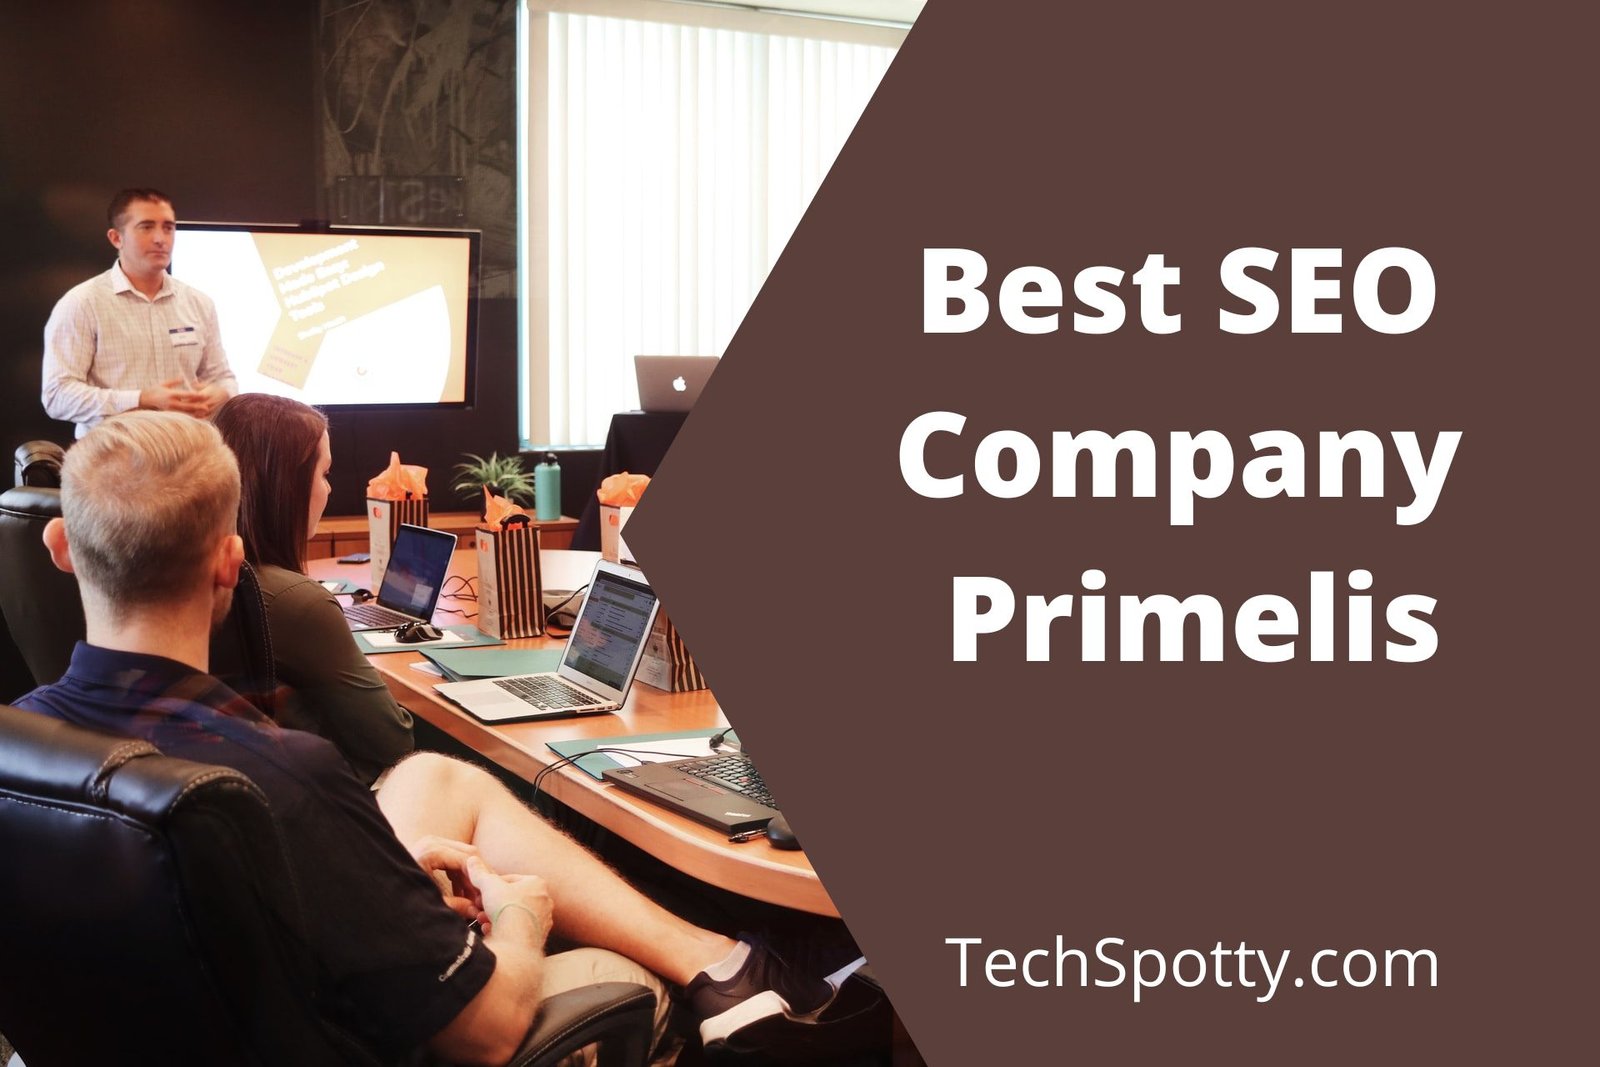 SEO's working in the Best SEO Company Primelis